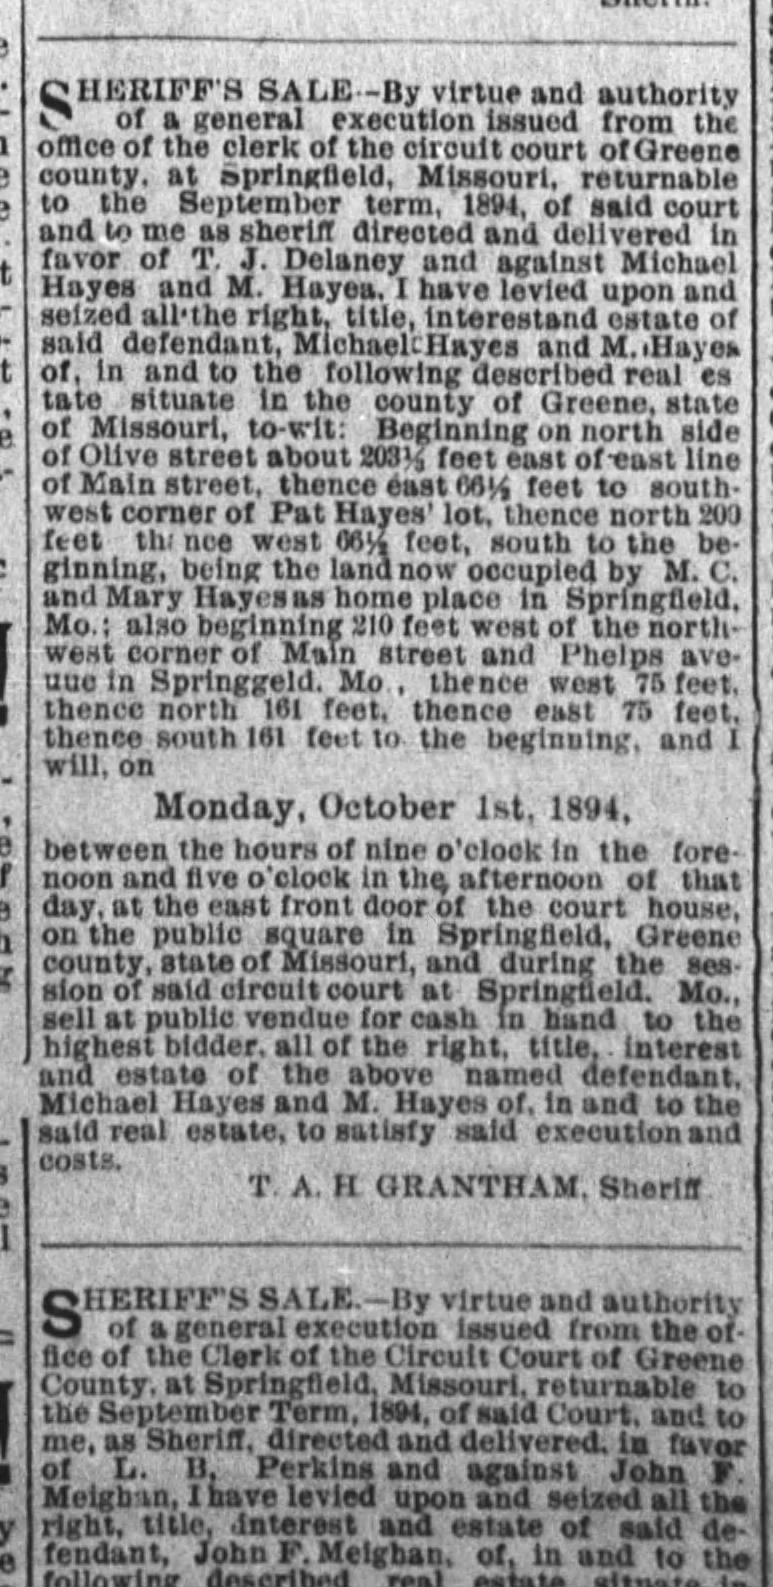 Michael Hayes/sheriff's sale in Springfield Leader 8 Sept 1894 pg 5